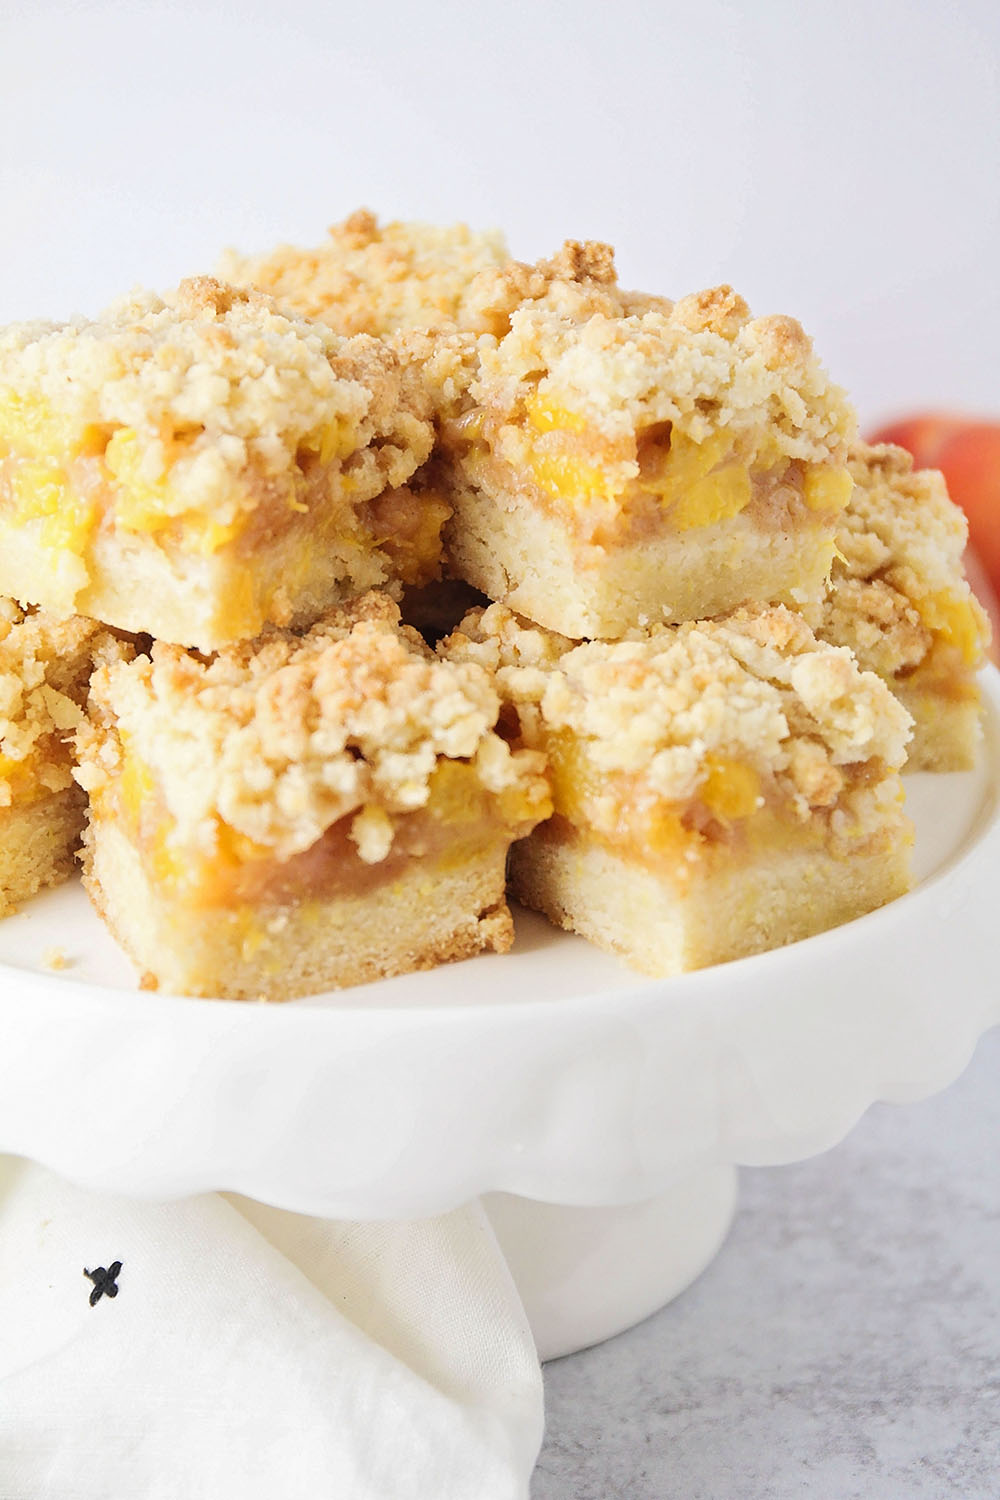 These delicious peach crumb bars have a sweet and buttery crumb mixture, surrounding juicy and tender peaches. They're perfect for summer!